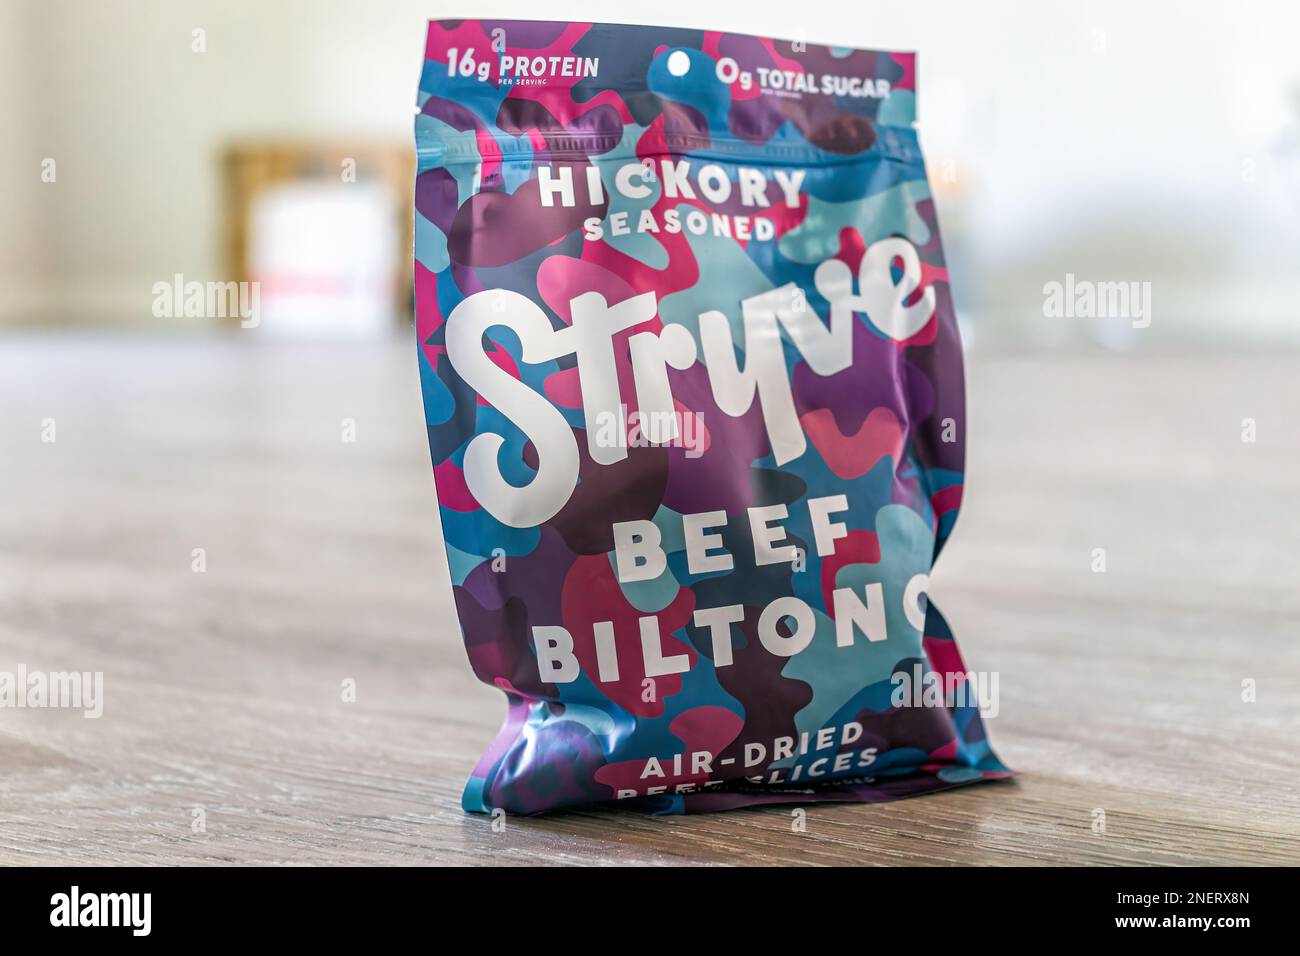 Naples, USA - May 27, 2022: Package product bag of beef biltong air-dried meat jerky with hickory seasoning by Stryve brand bought at Costco Stock Photo